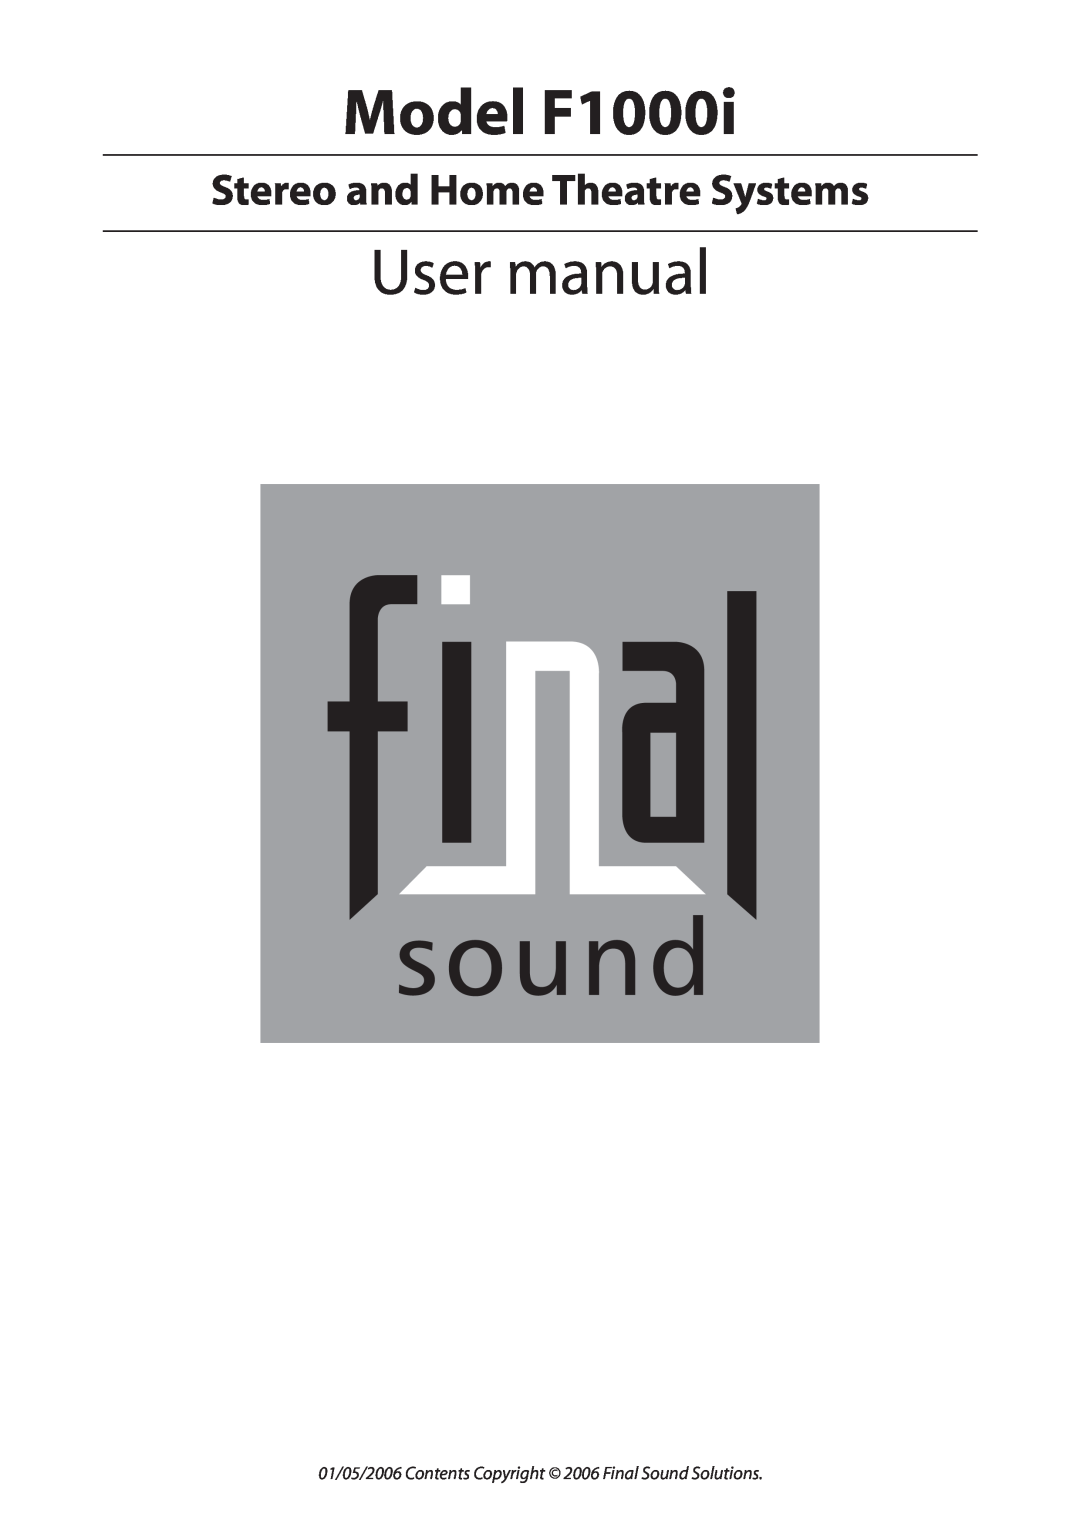 Final Sound user manual Model F1000i, Stereo and Home Theatre Systems 